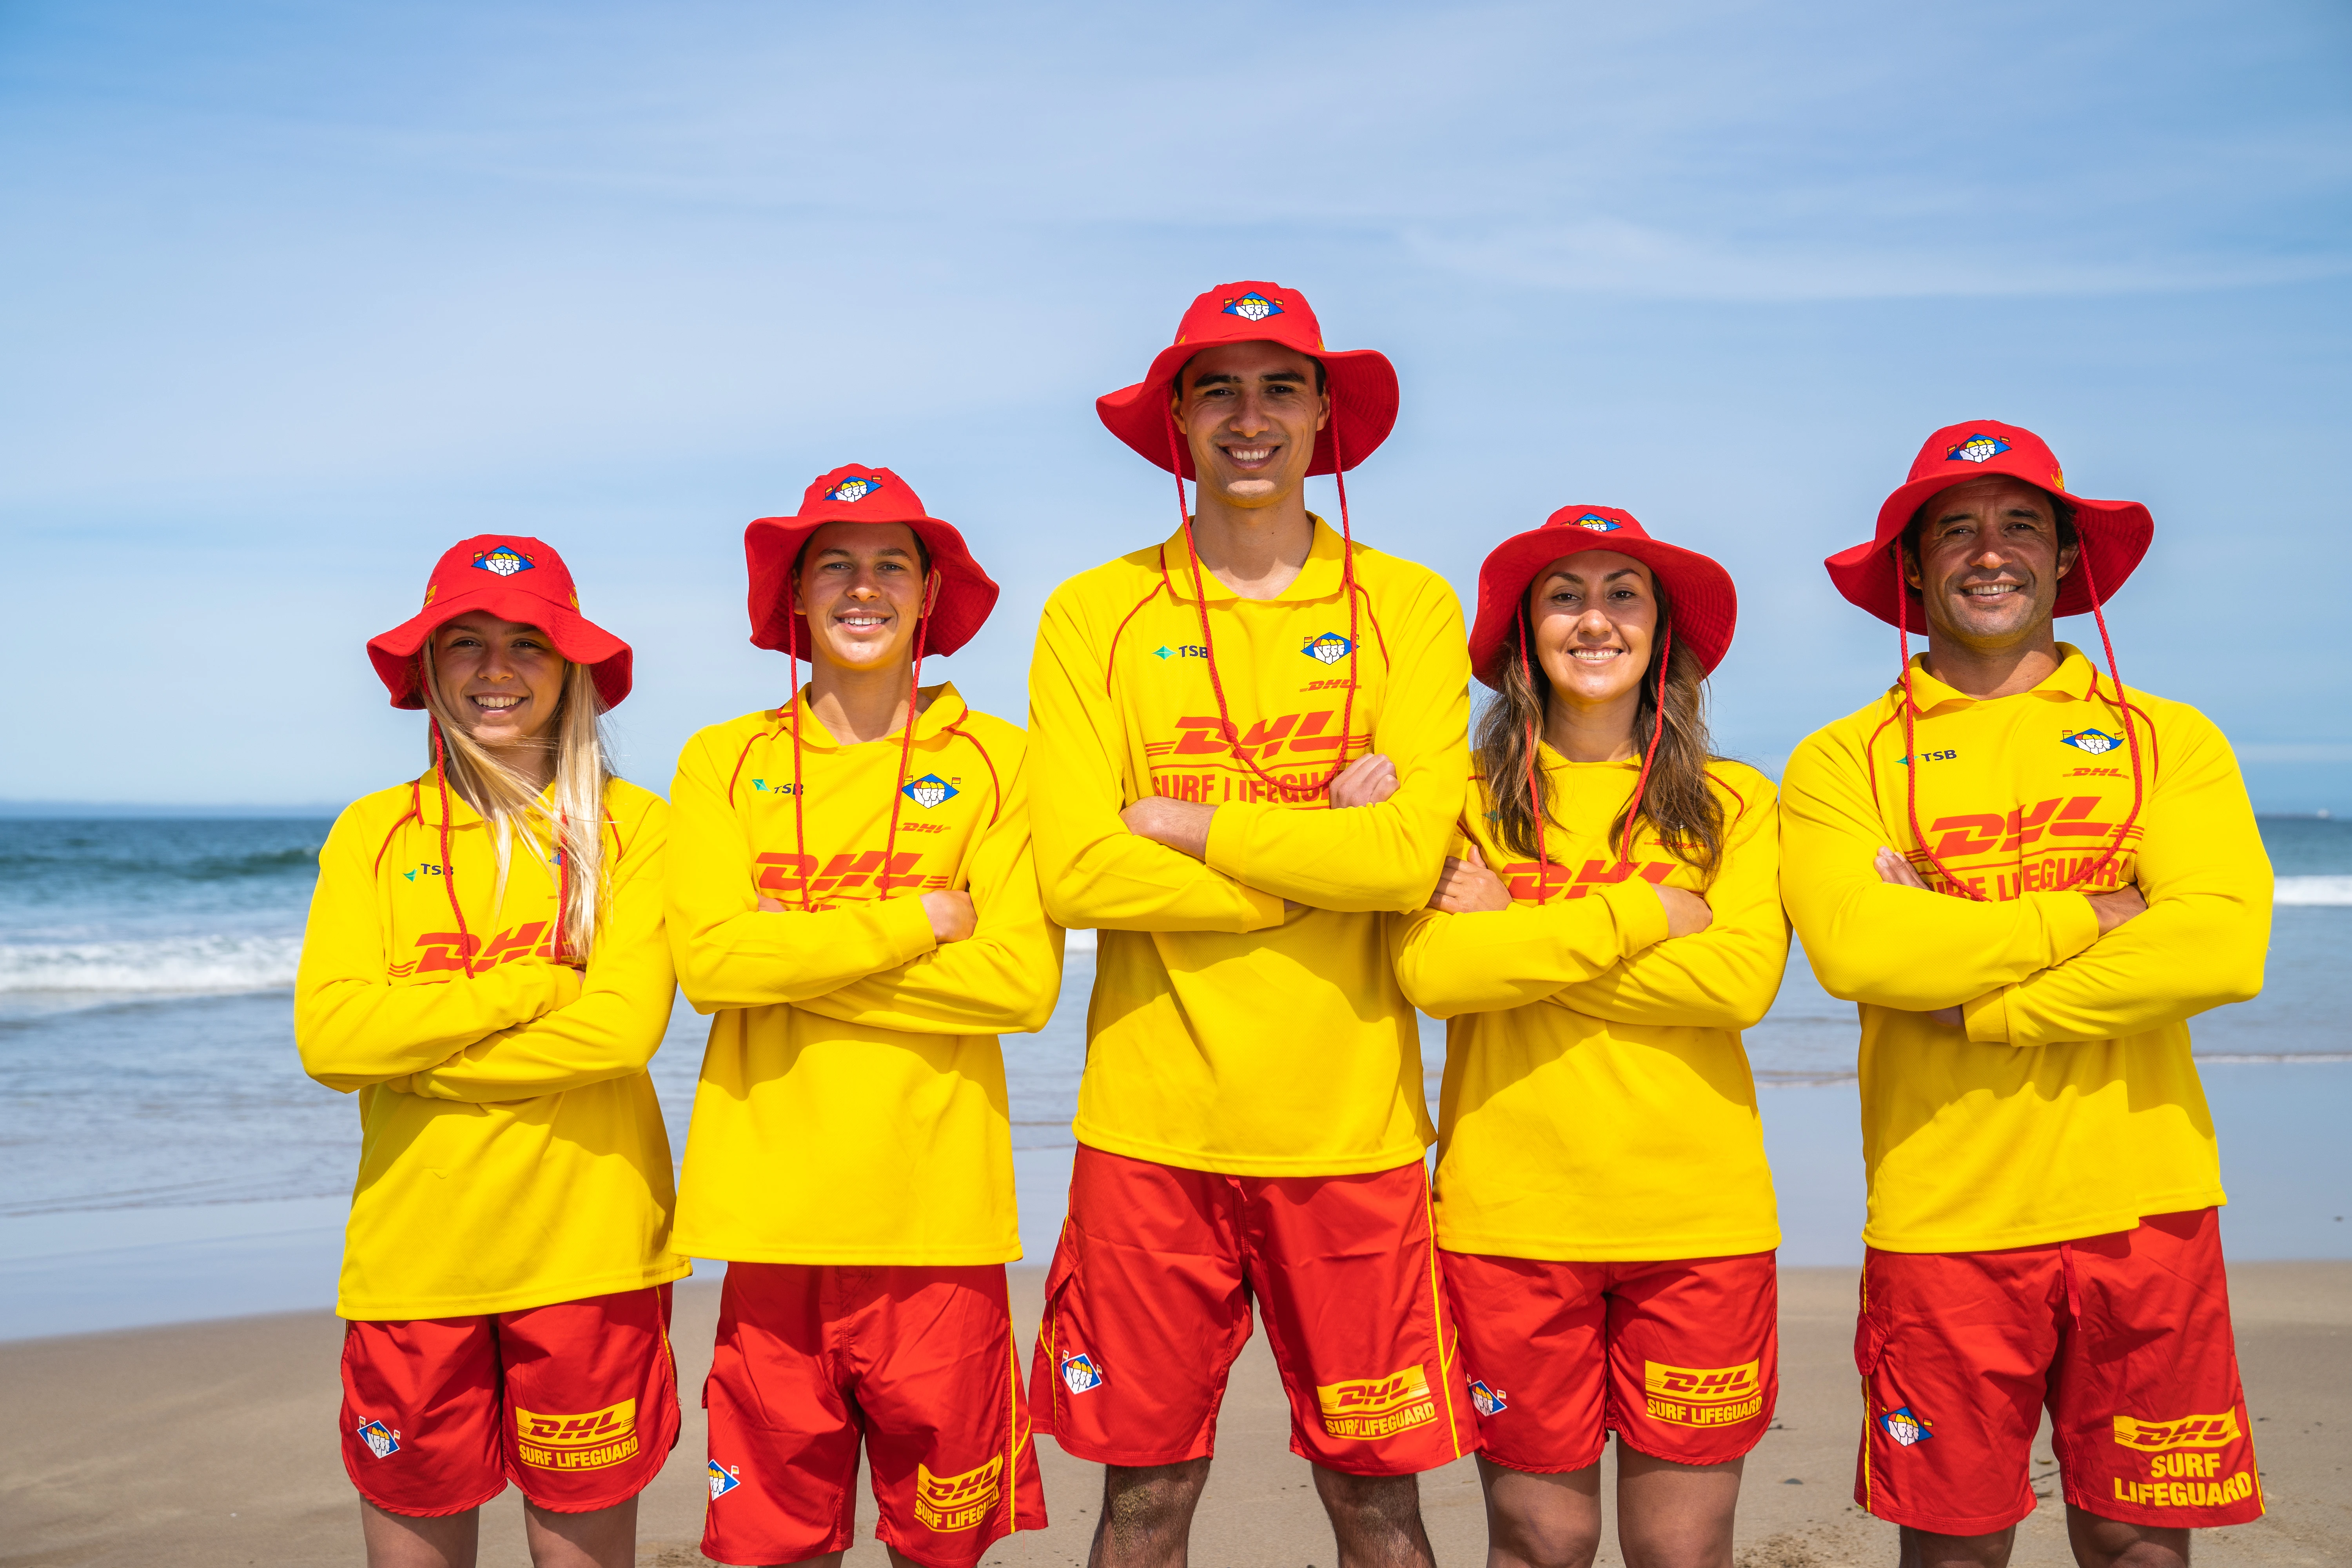 Surf life savers lined up on the beach in their uniforms which are red and yellow